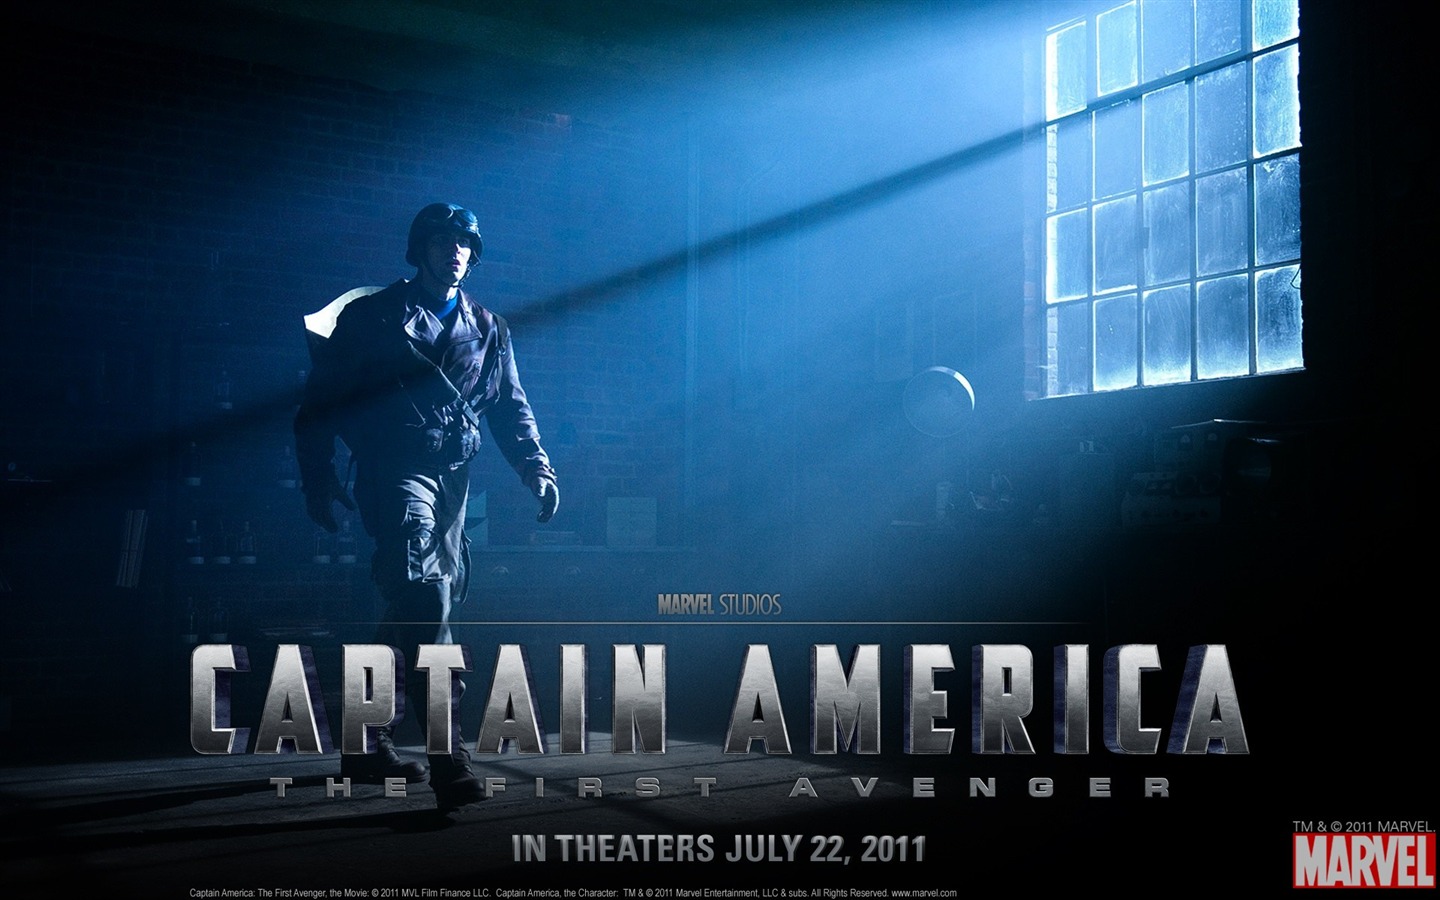 Captain America: The First Avenger wallpapers HD #17 - 1440x900